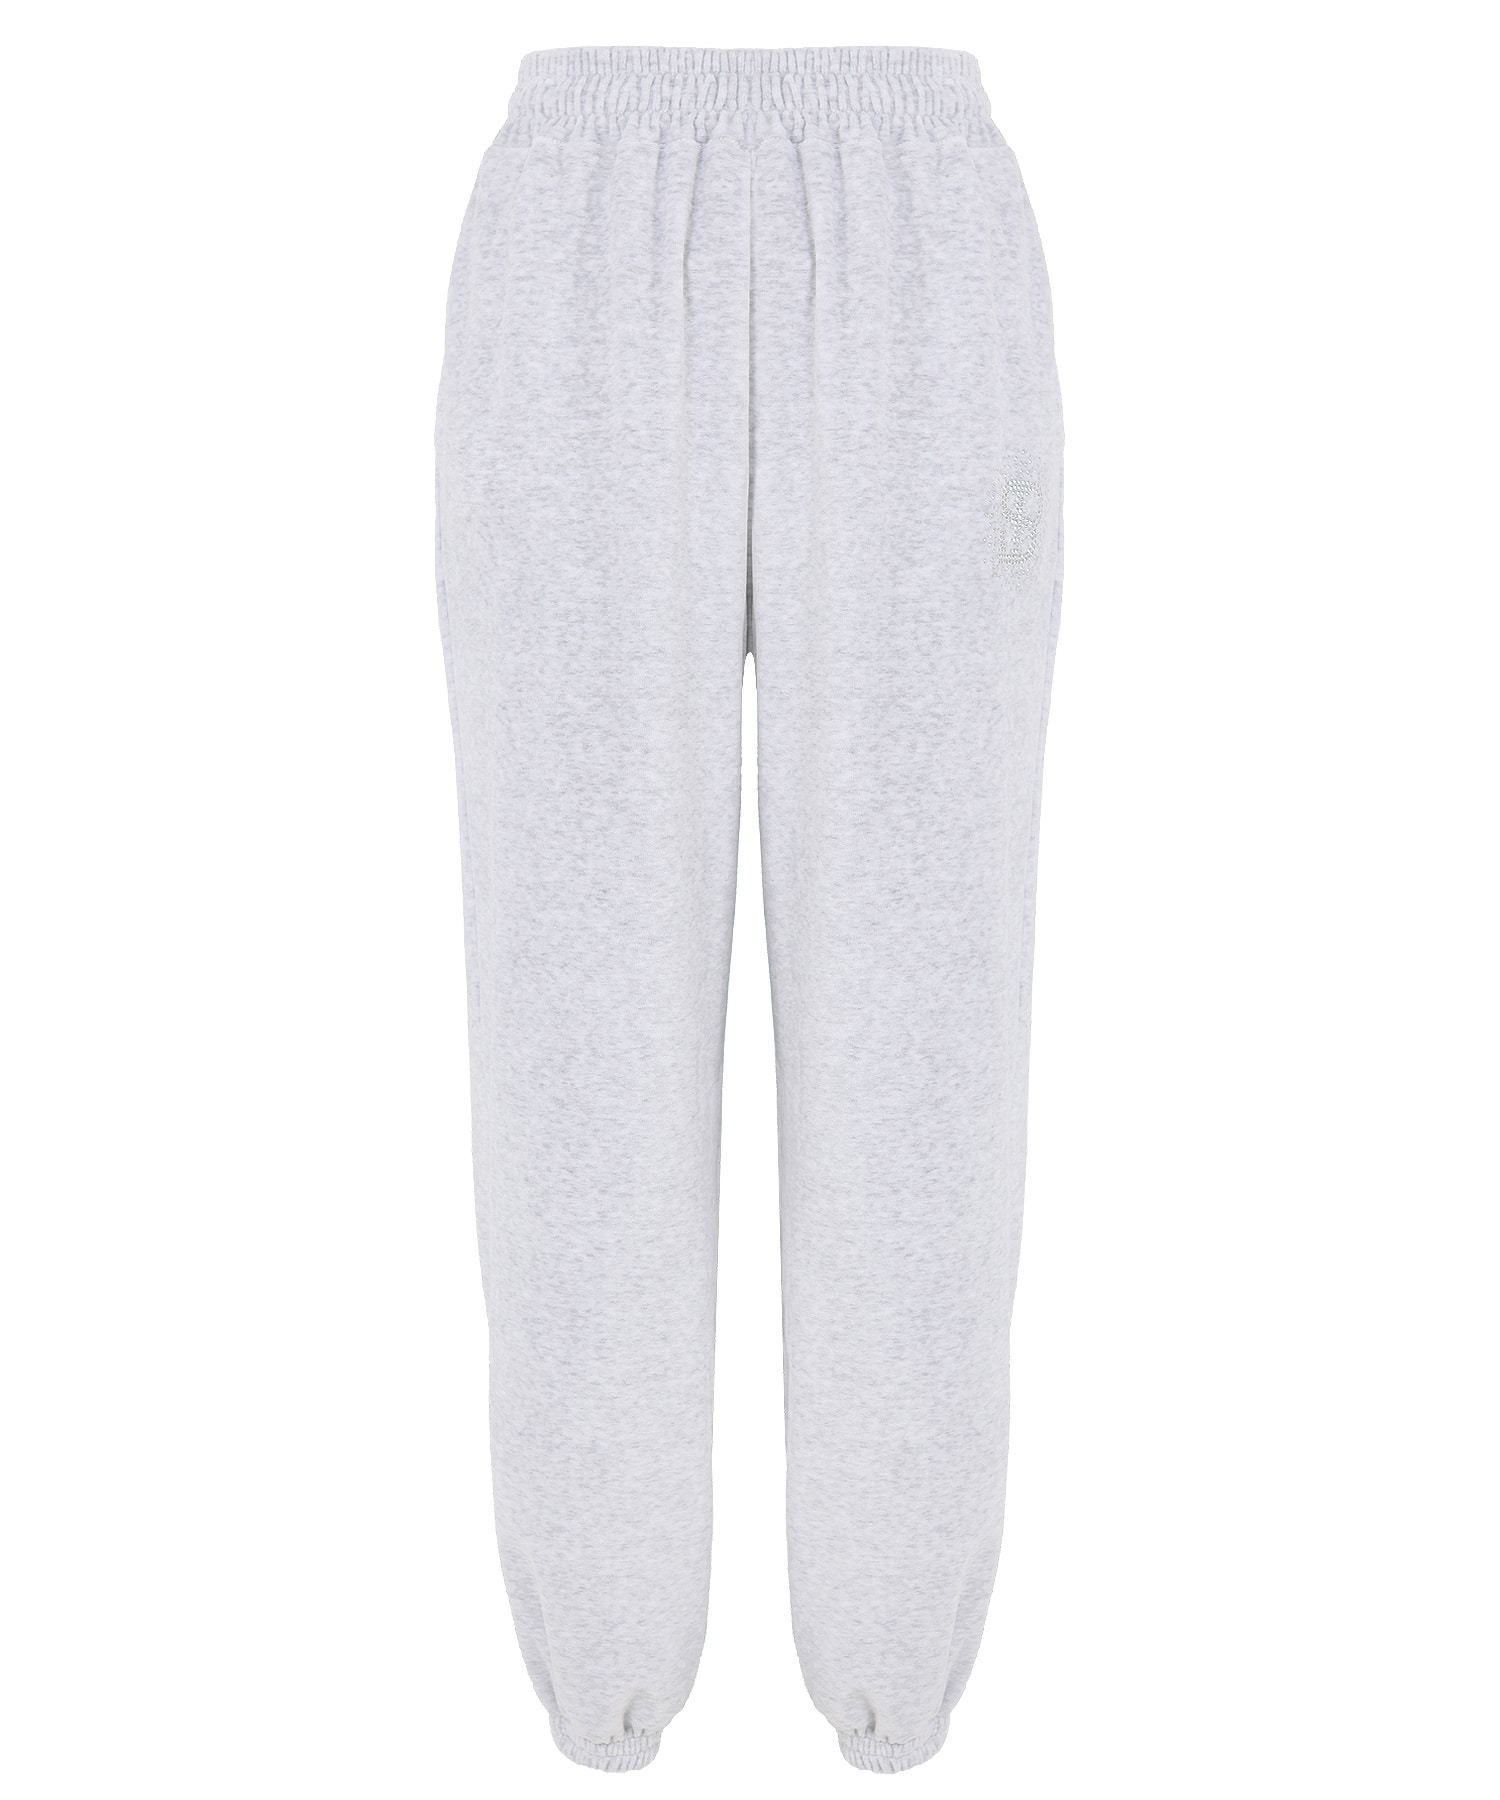 RELAX JOGGER PANTS IN GREY